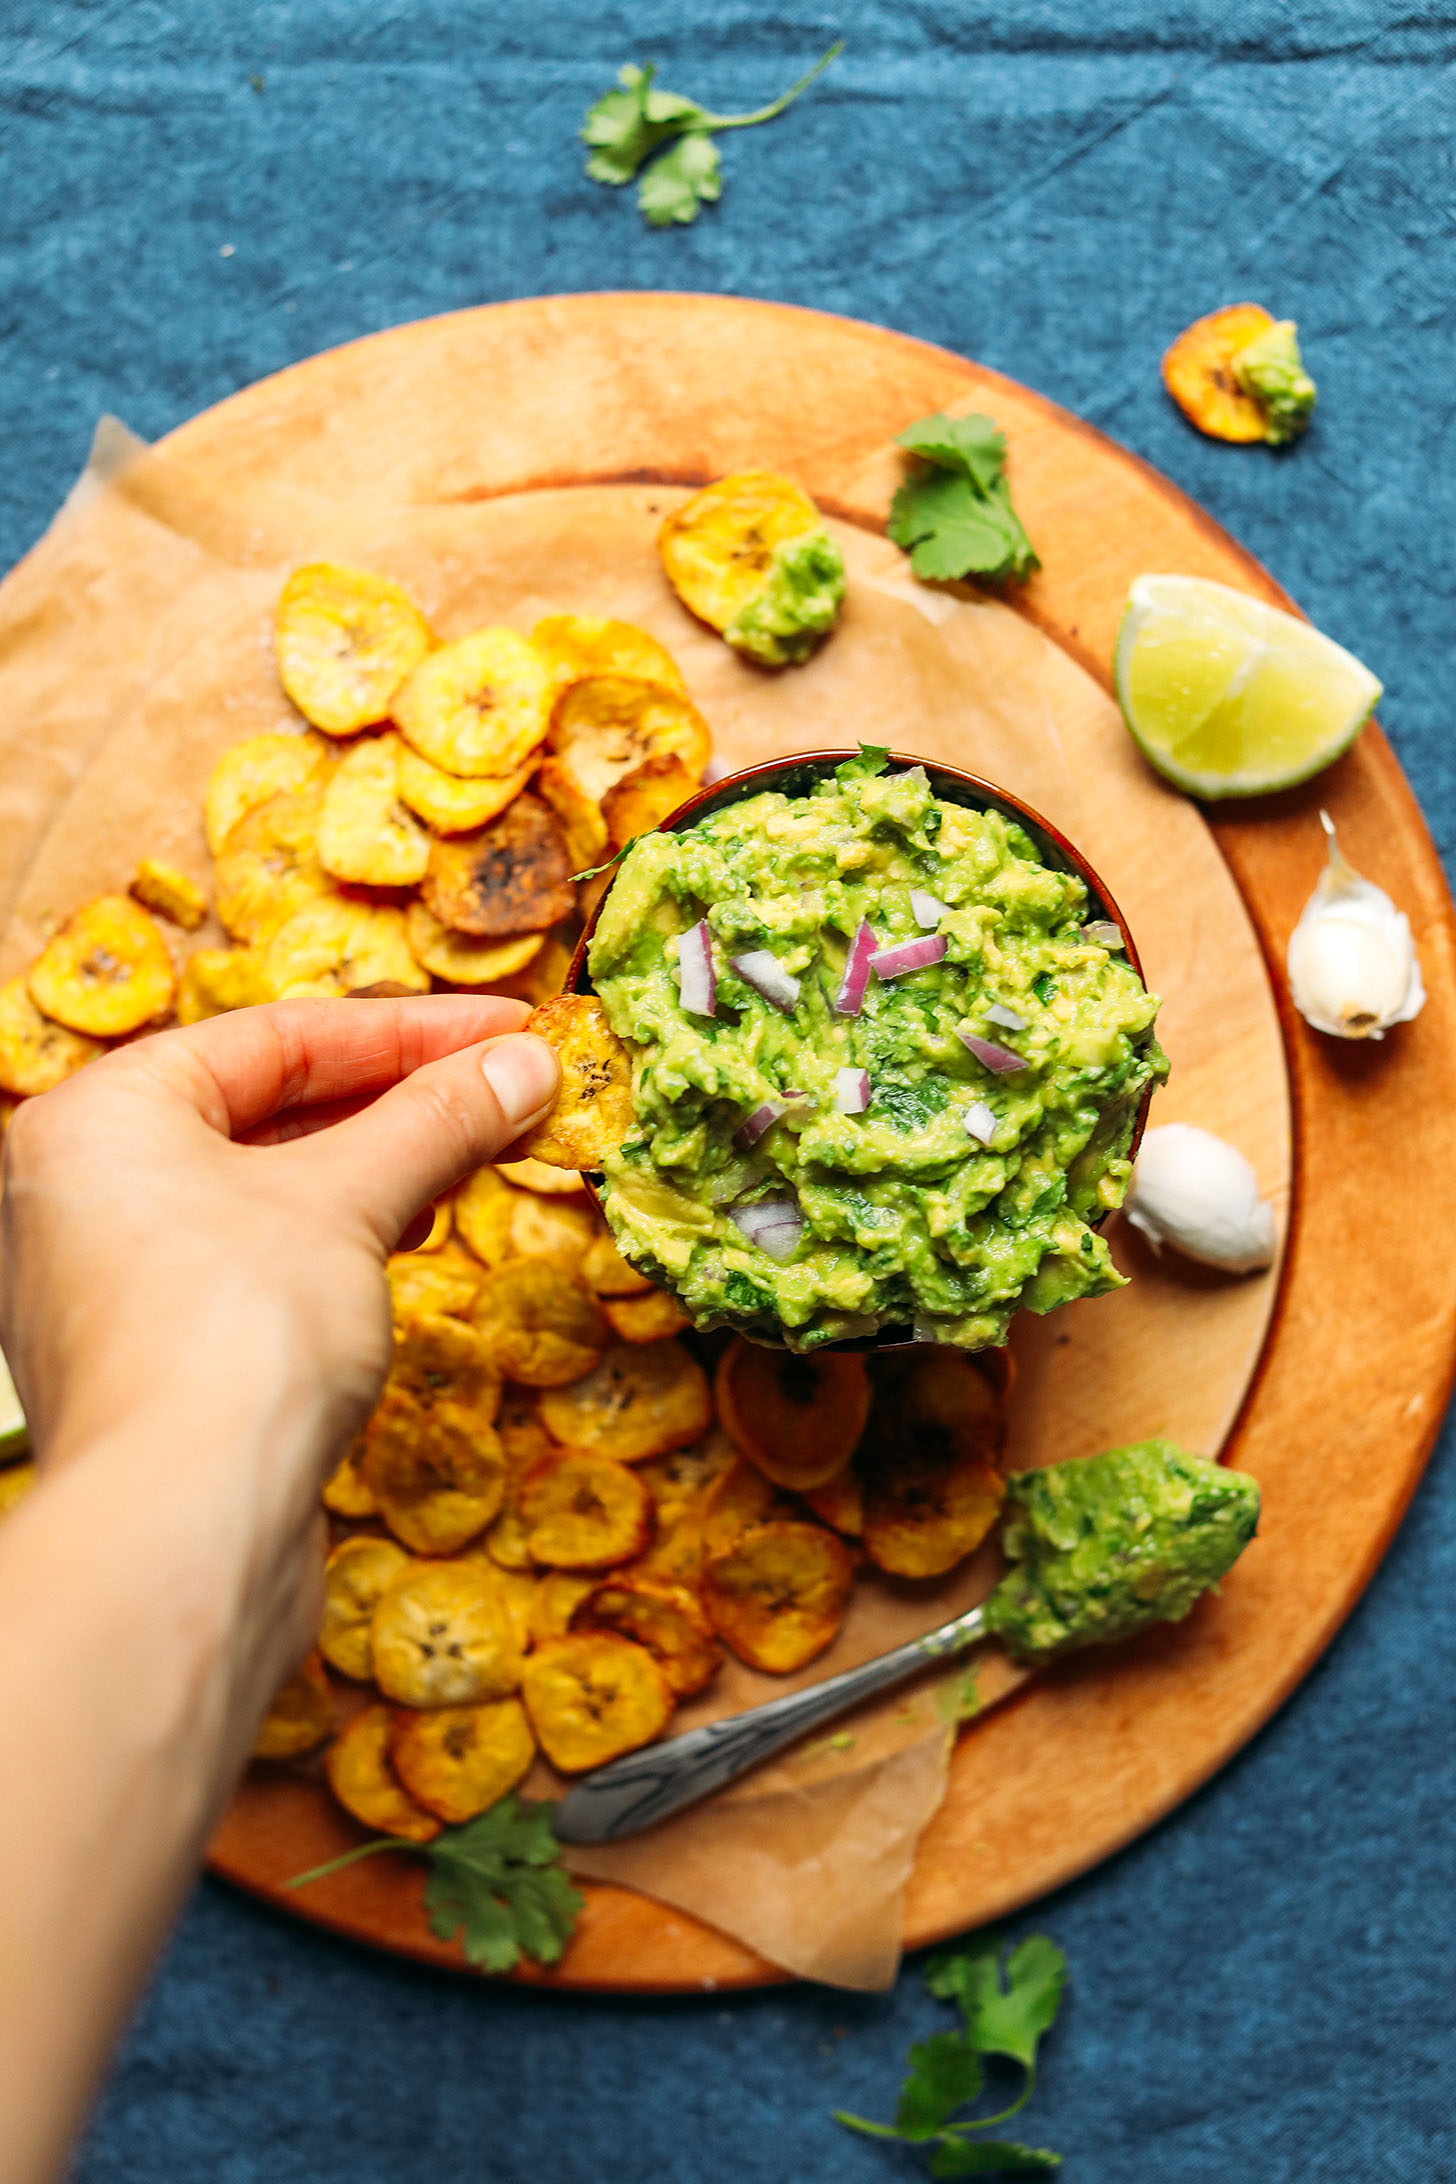 Grabbing a scoop of Garlicky Guacamole on a Crispy Baked Plantain Chip